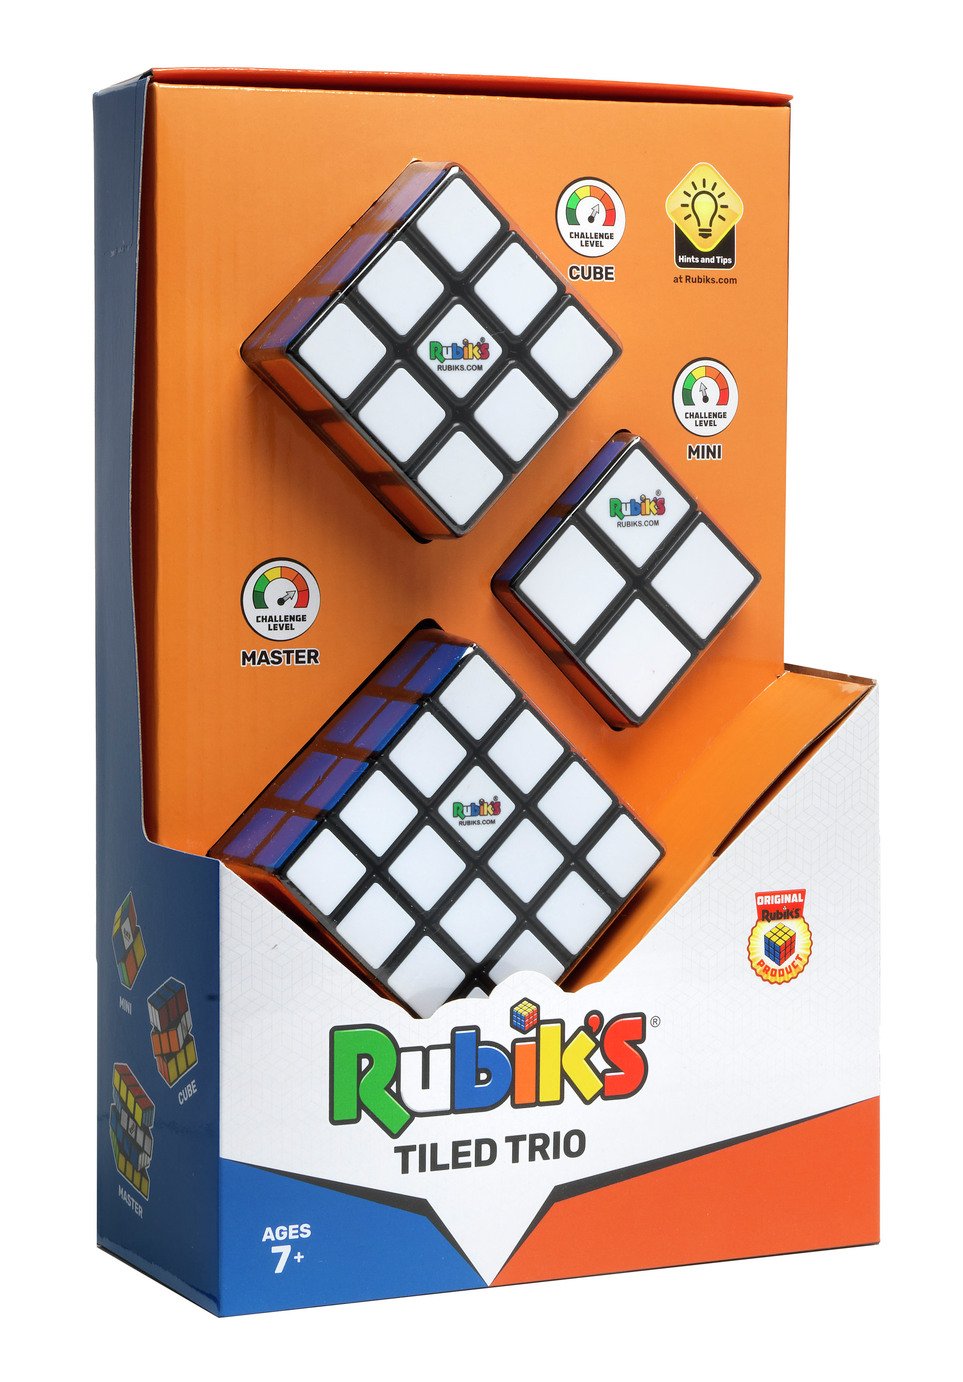 Rubiks Trio Gift Pack Review